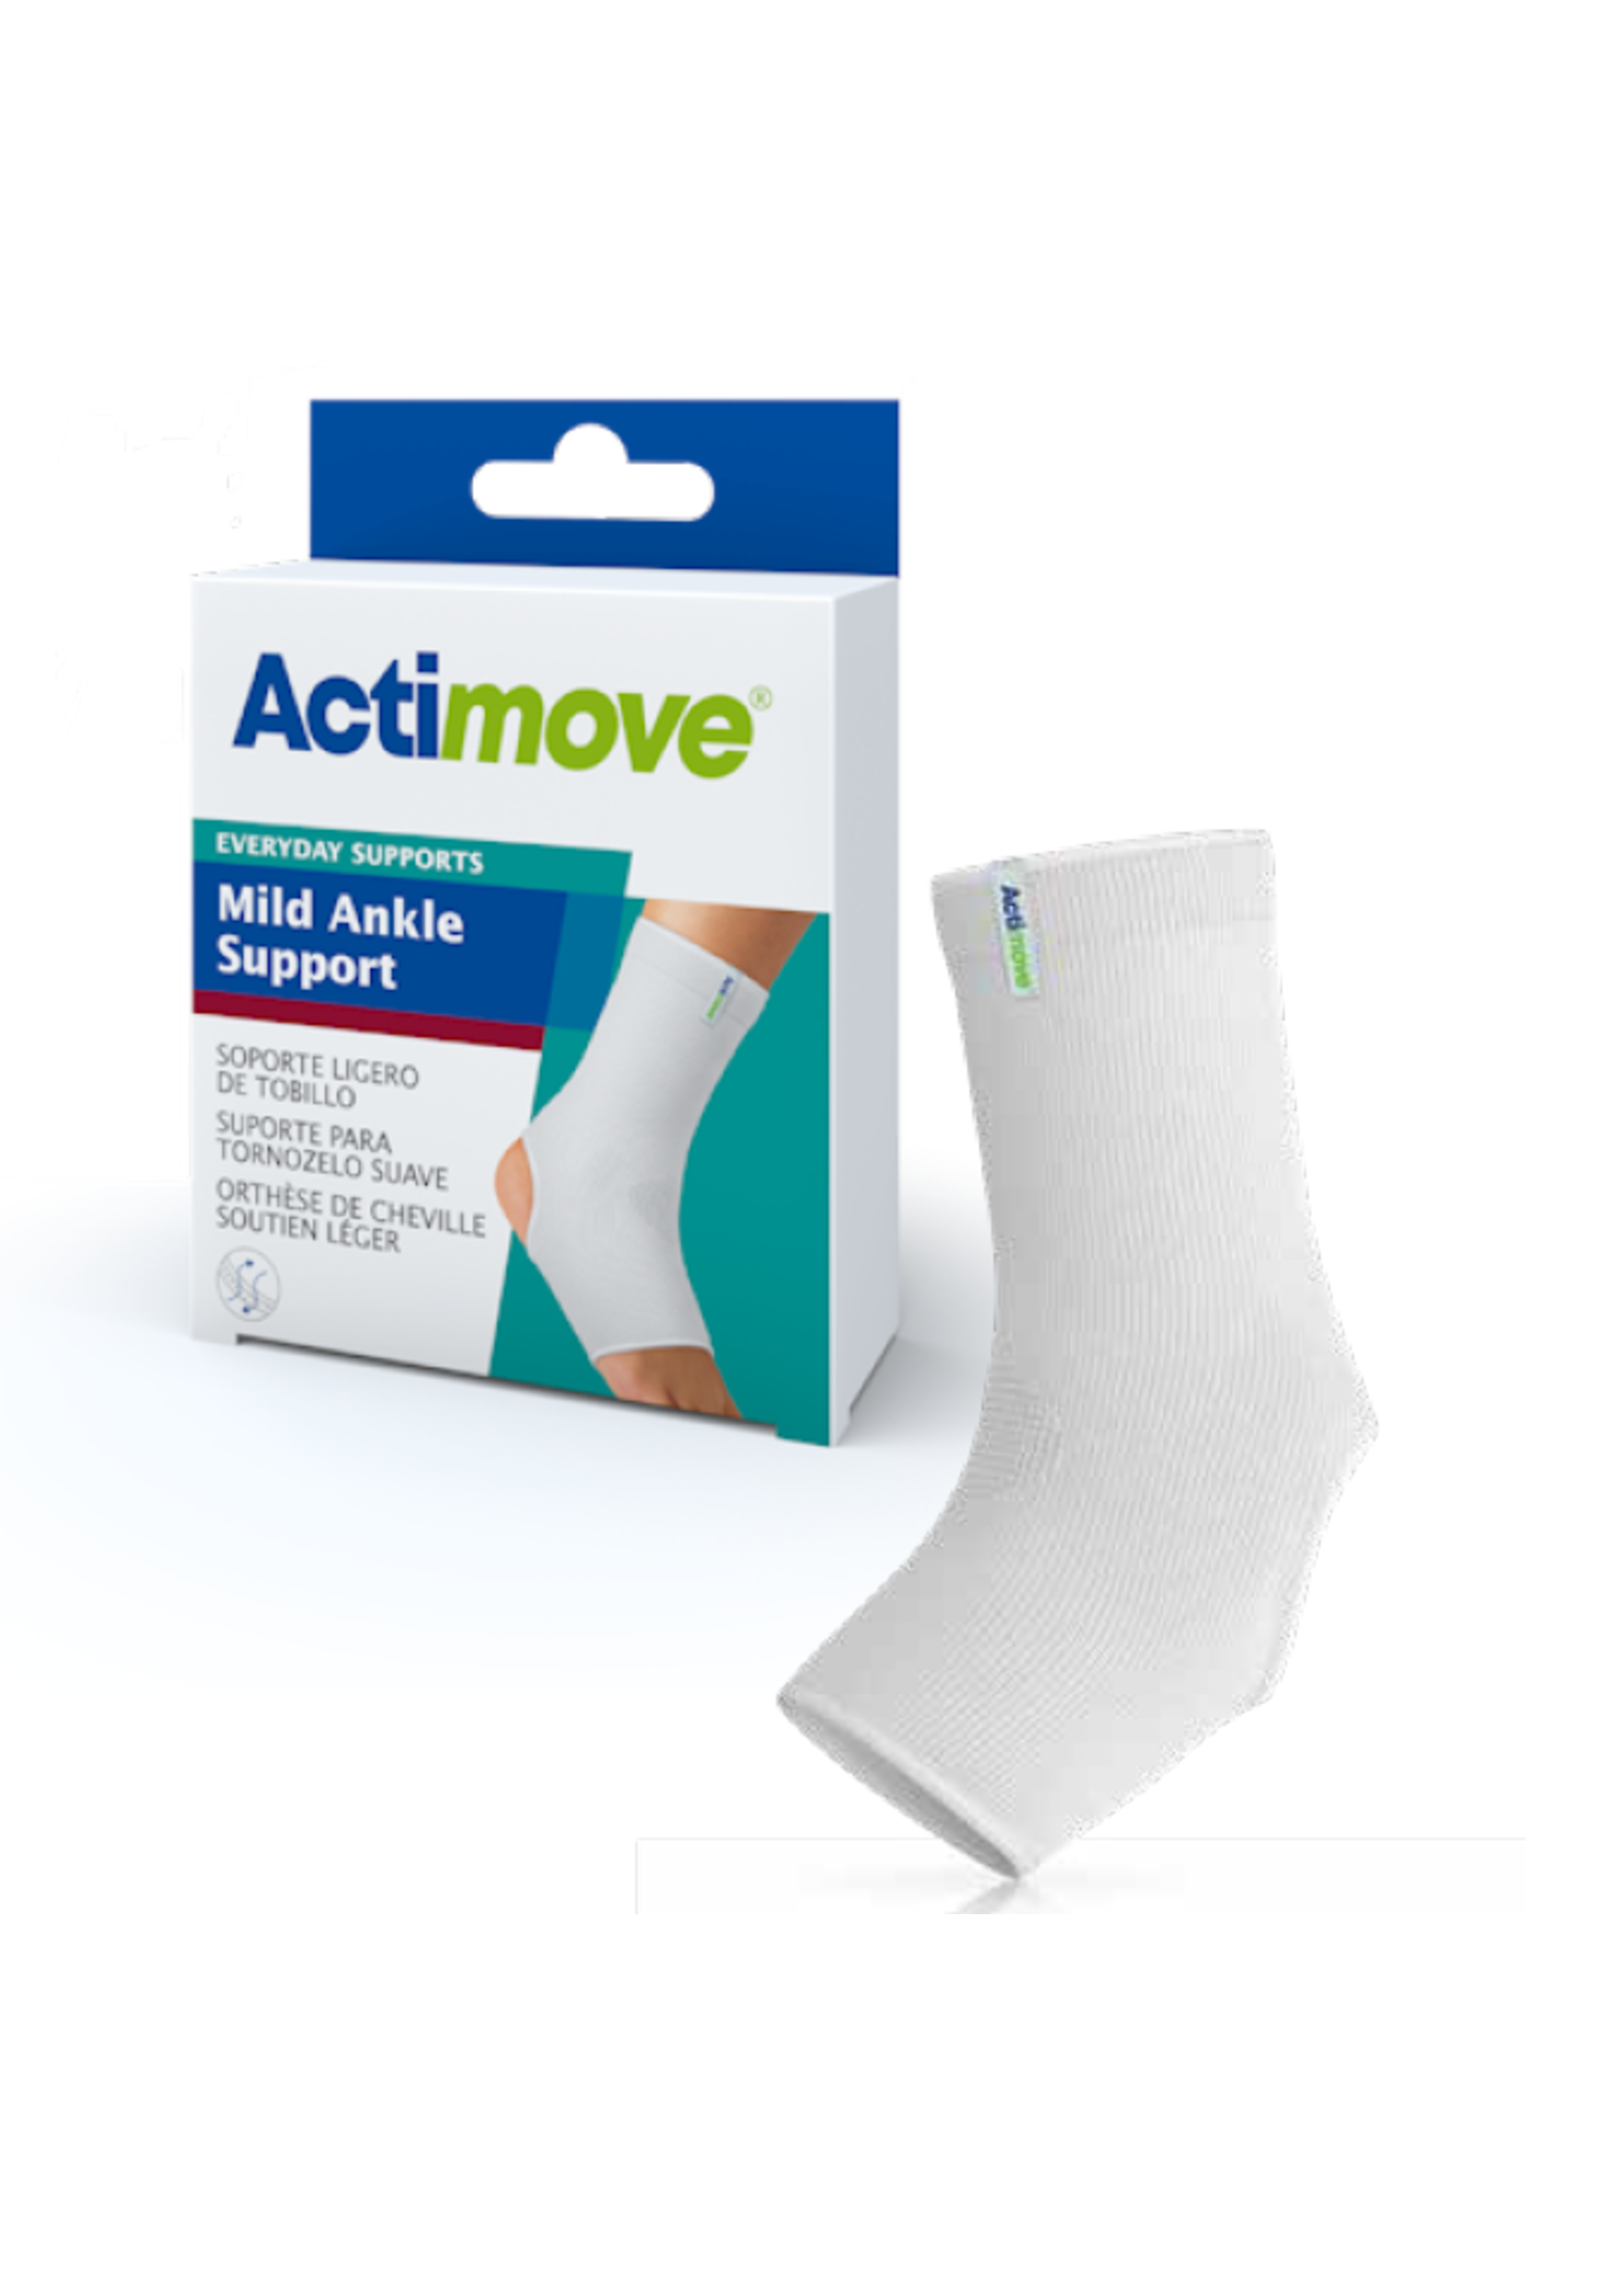 ActiMove Mild Ankle Support